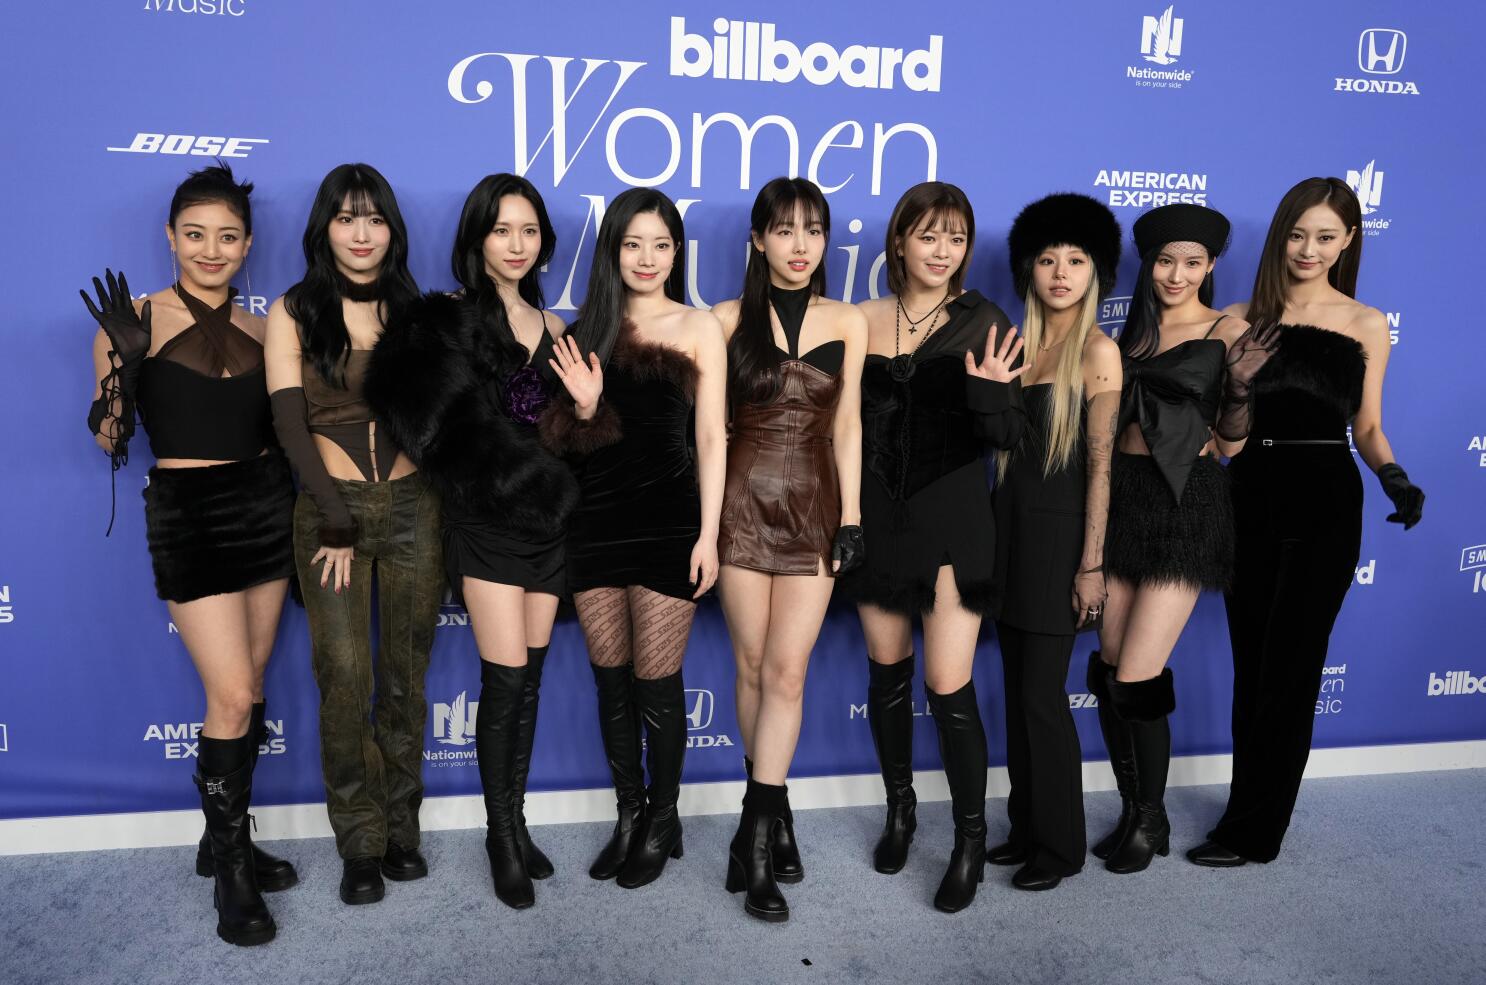 K-pop act Twice draws swarms of fans during L.A. pop-up appearance - Los  Angeles Times